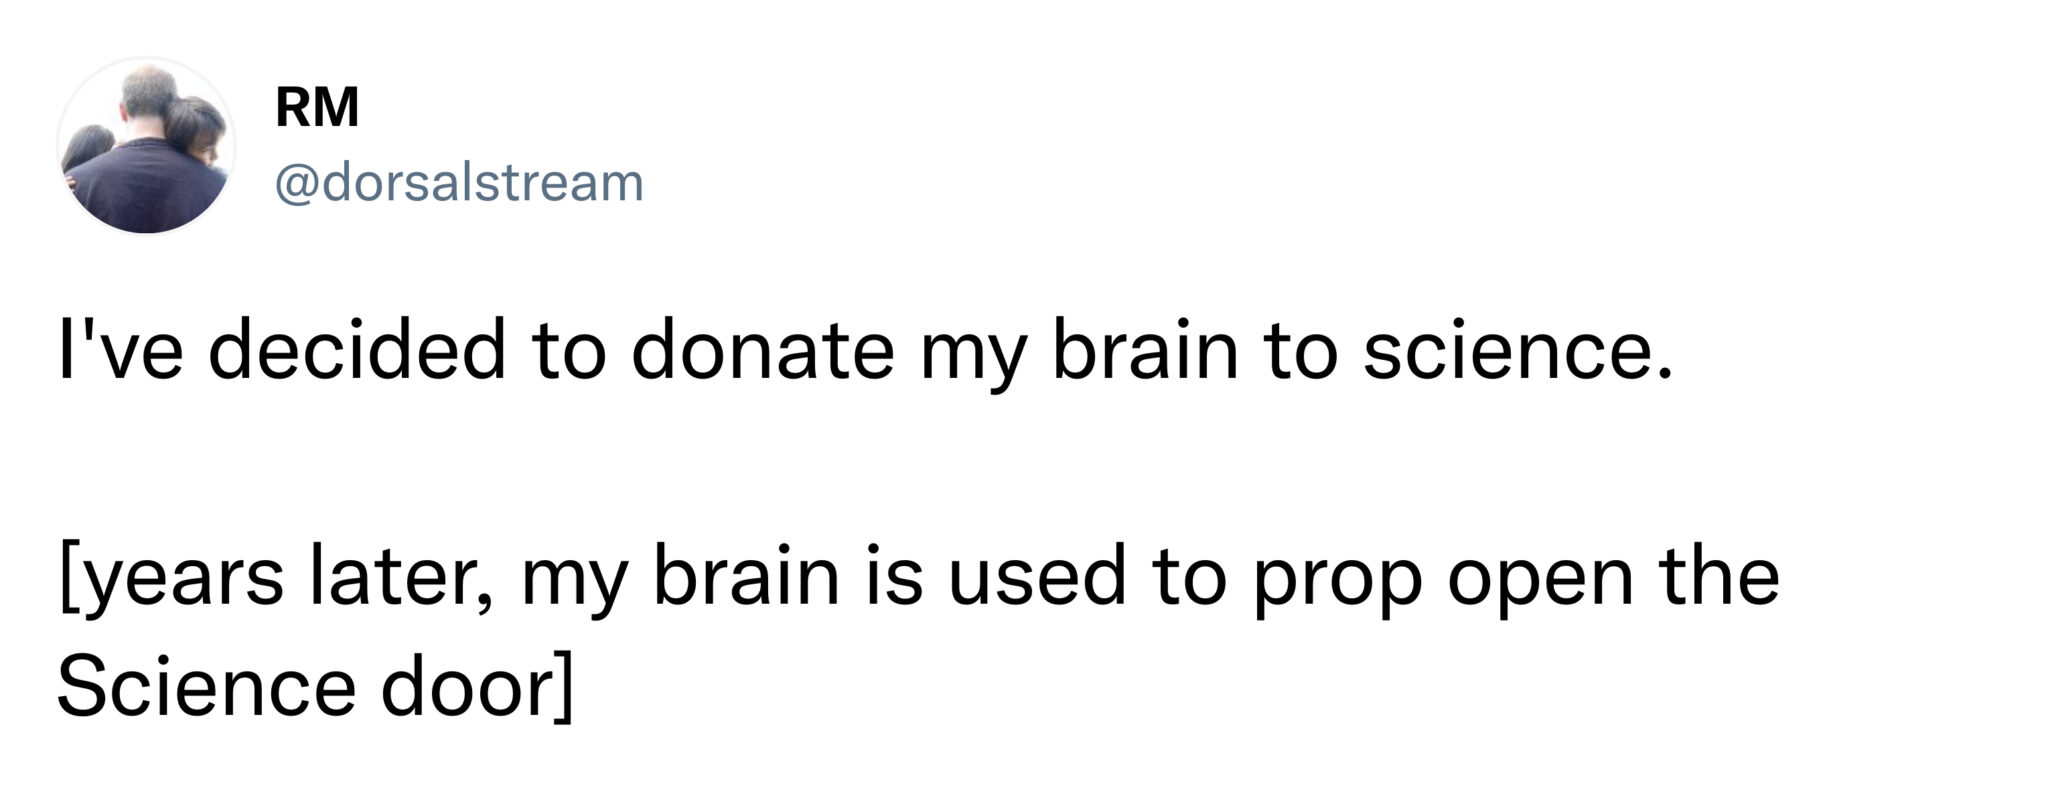 funny tweets and memes -  funny tweets about masturbation - Rm I've decided to donate my brain to science. years later, my brain is used to prop open the Science door